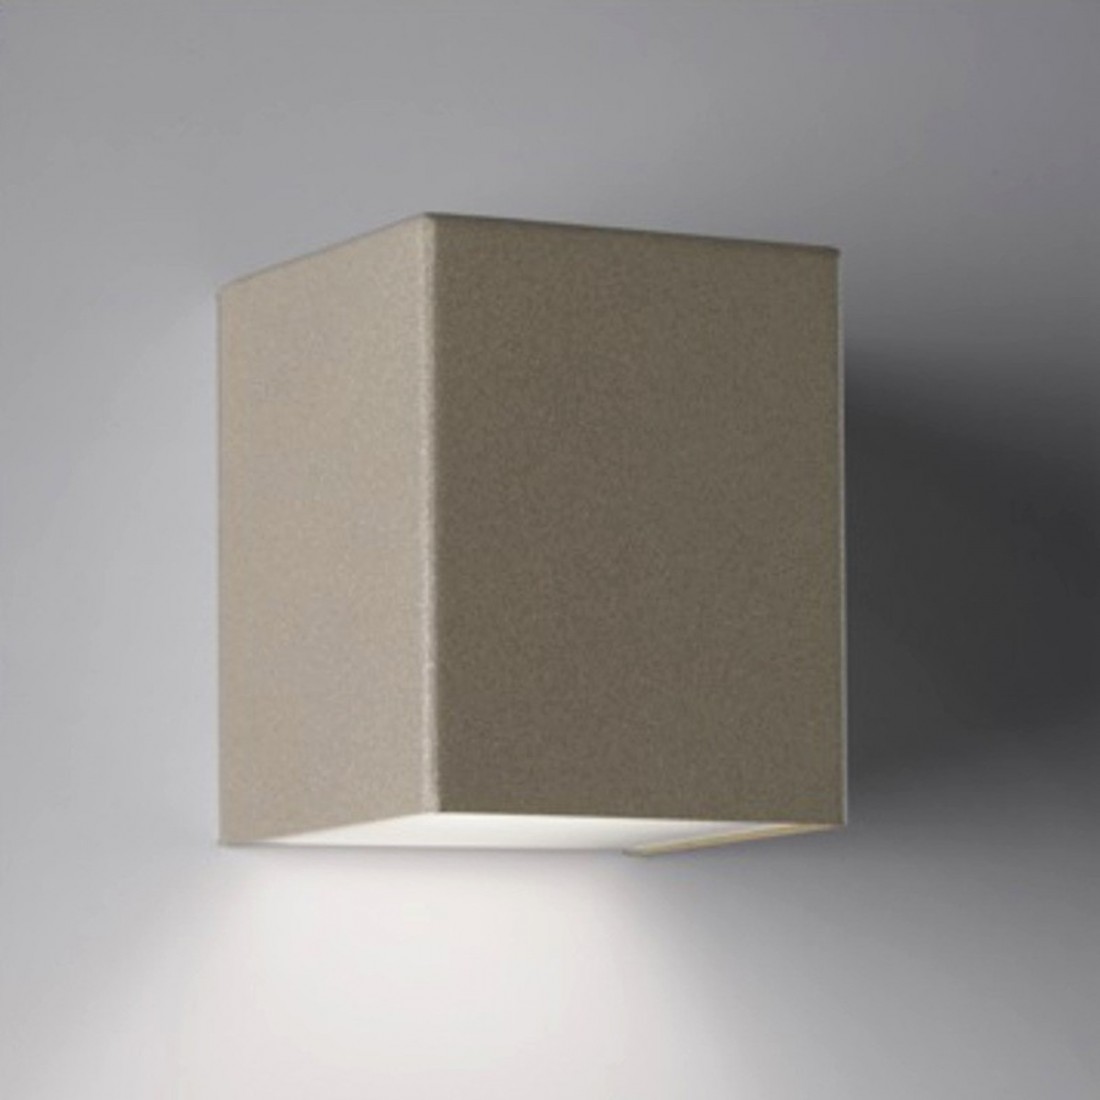 Applique murale LED moderne CUBICK 899 5A Cattaneo lighting